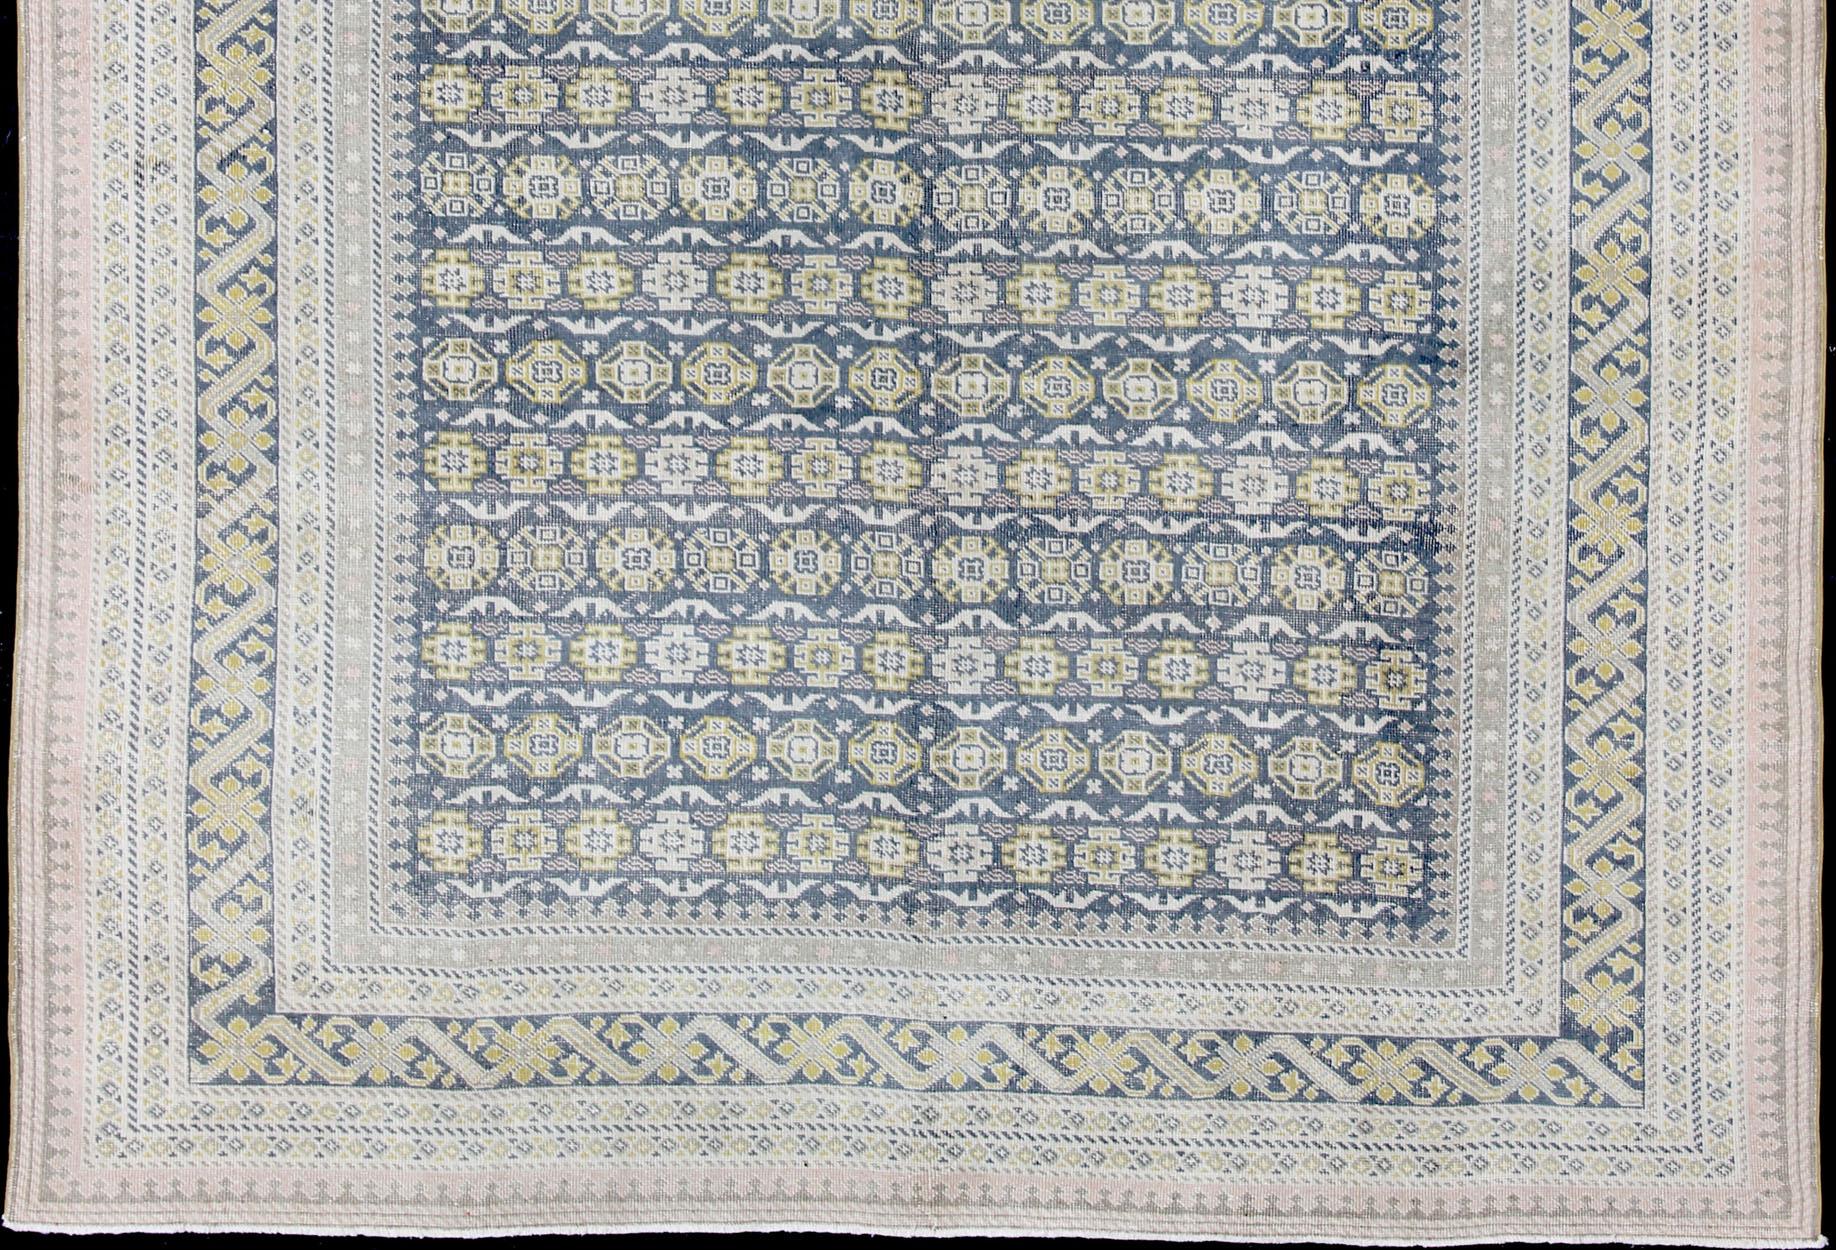 Oushak Antique Khotan Rug in Shades of Blue with Gray, L. Pink and Yellow Accents For Sale